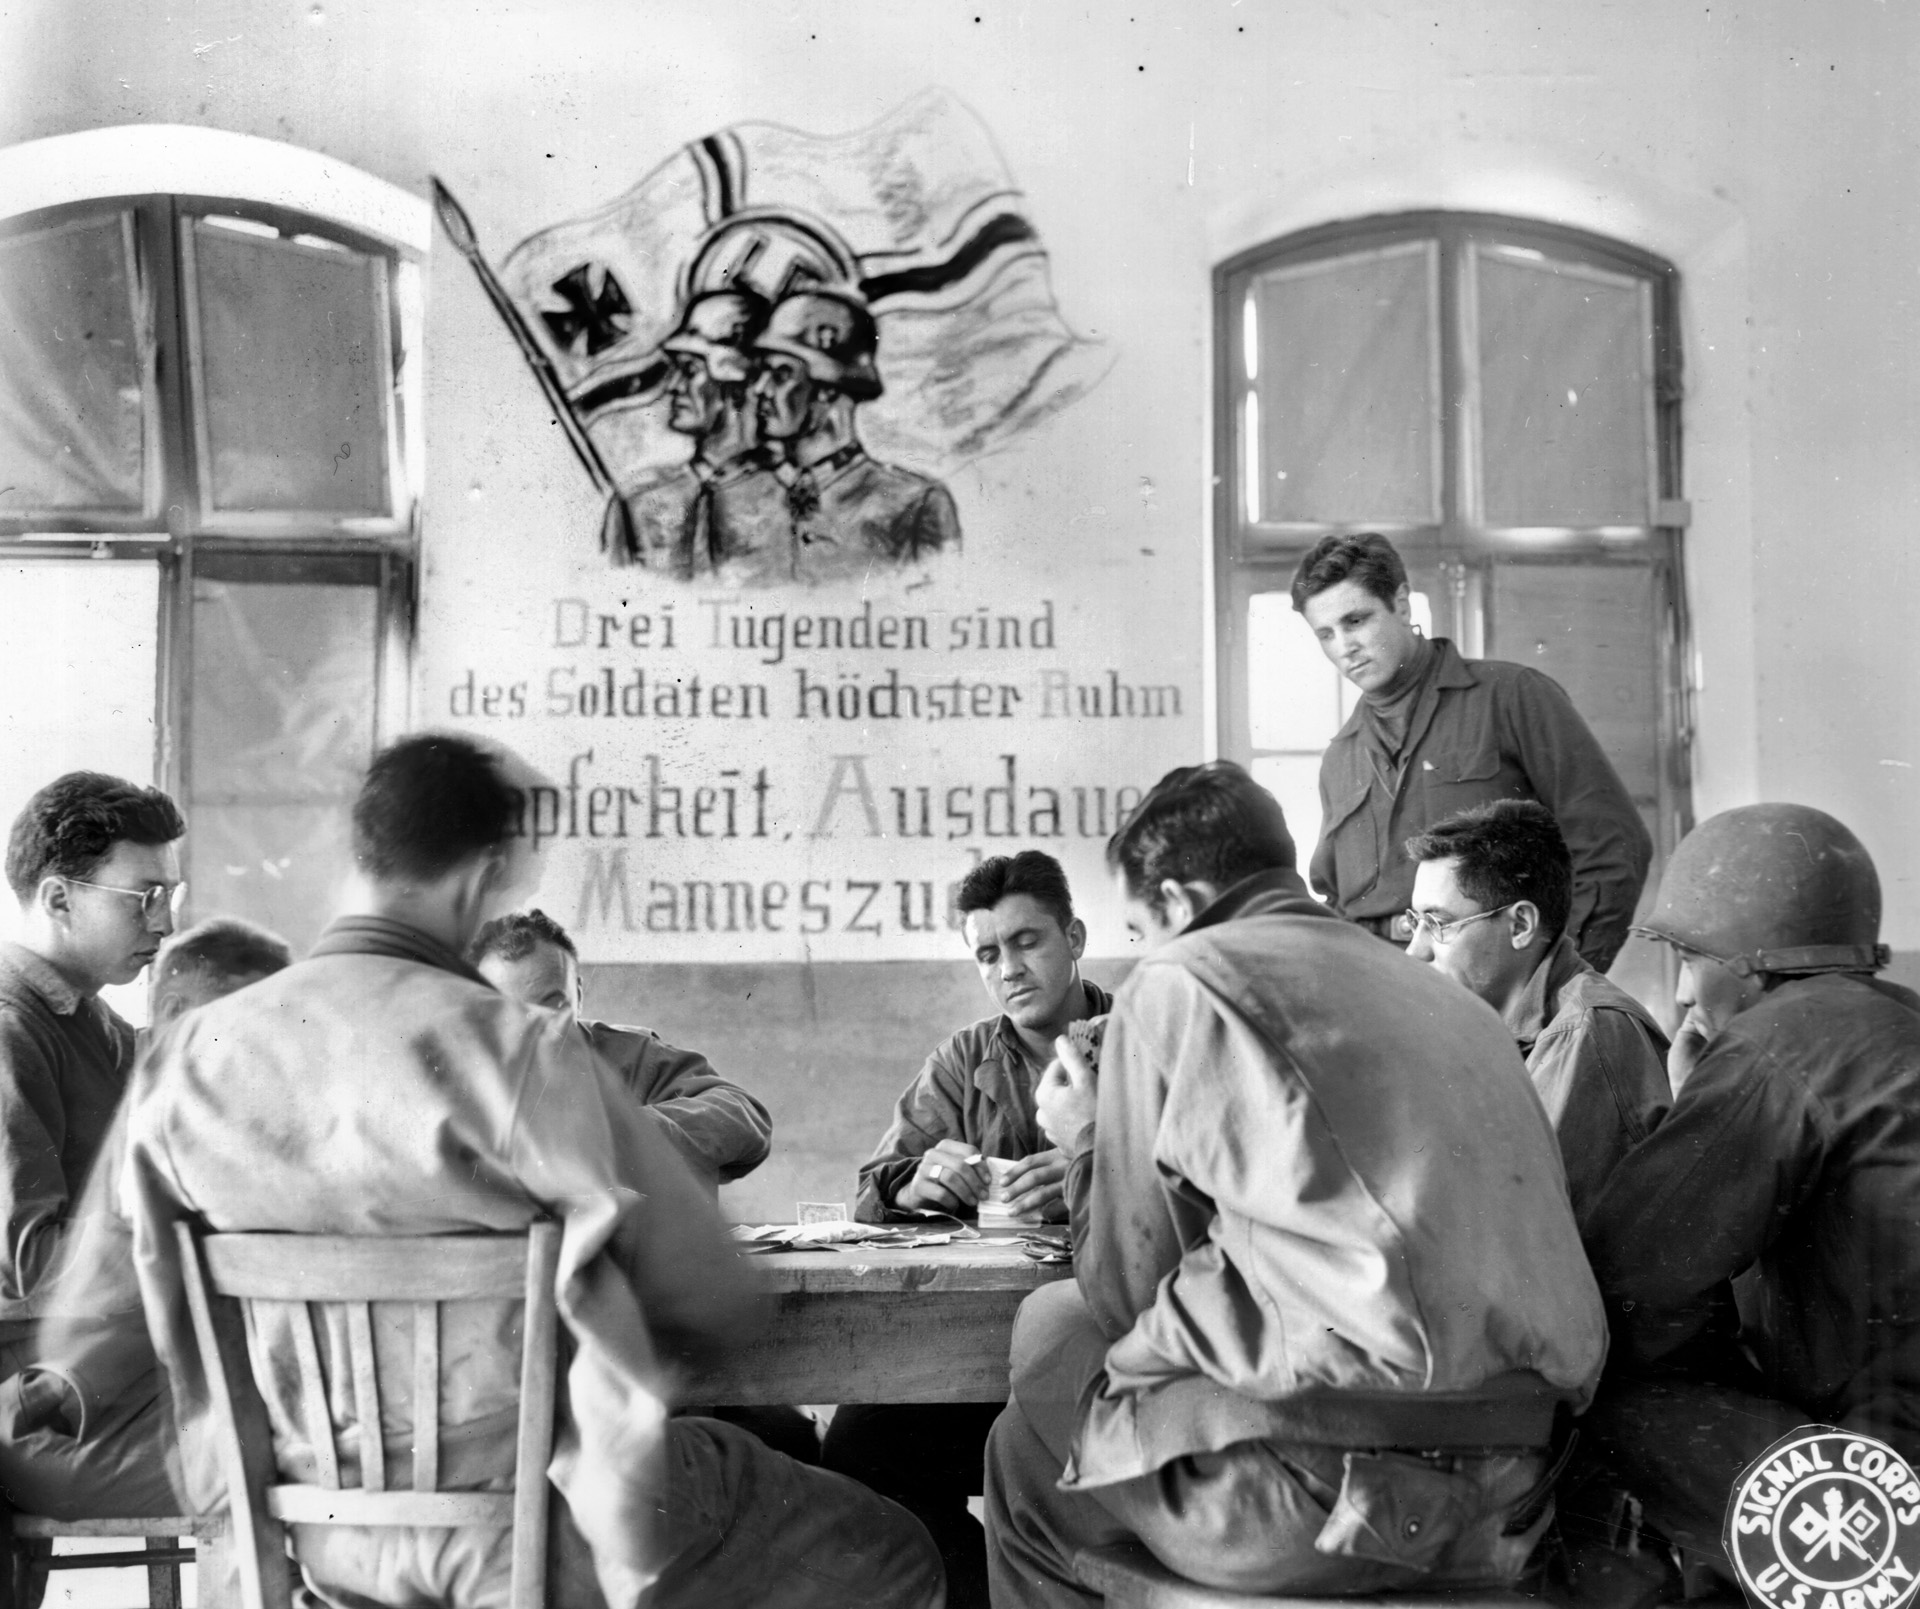 A group of American soldiers enjoys a spirited game of poker in a building in Luneville that was once occupied by German troops.  The poster on the wall, meant to inspire the German troops, reads: ‘Three virtues are the soldier’s greatest fame:  bravery, perseverance, and manhood.’ 